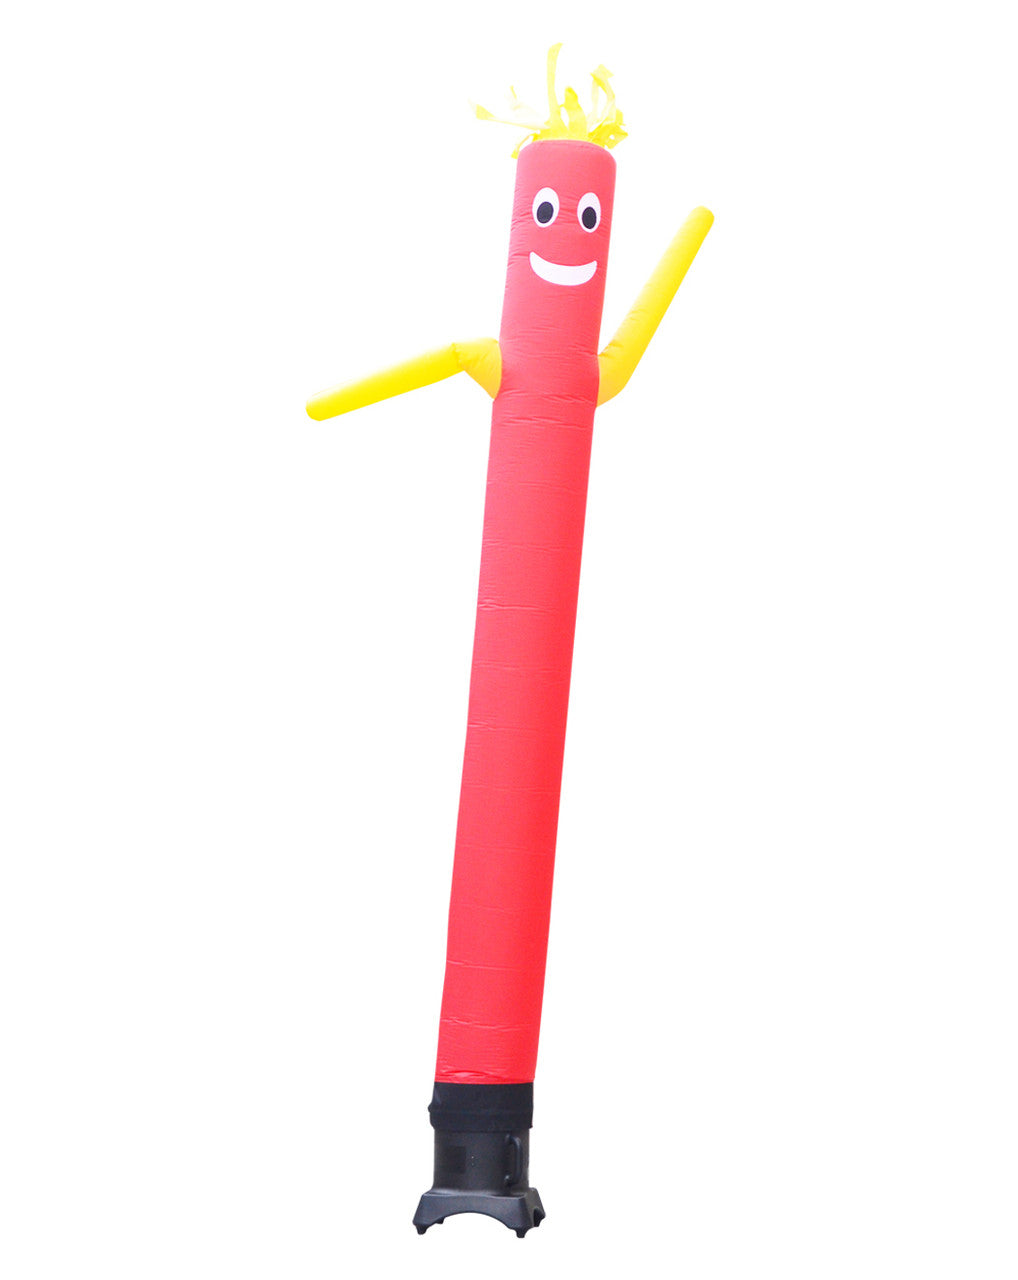 10ft Red Air Dancer with Yellow Arms Inflatable Tube Man